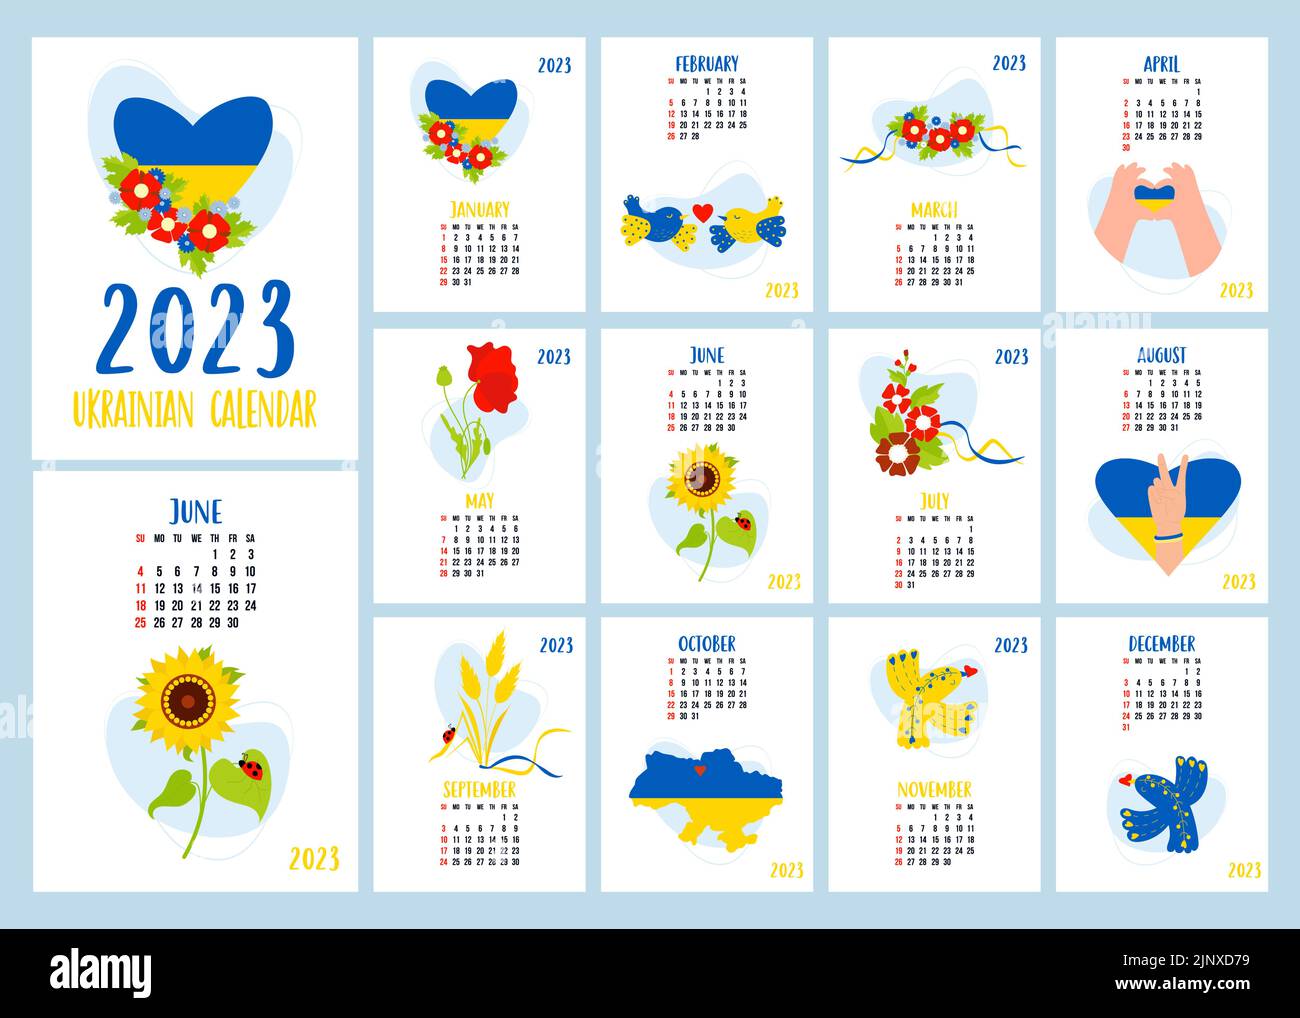 Calendar template 2023 with Ukrainian symbols, flowers, birds and yellow blue flag and map of Ukraine. Vertical set of 12 pages and cover in English Stock Vector